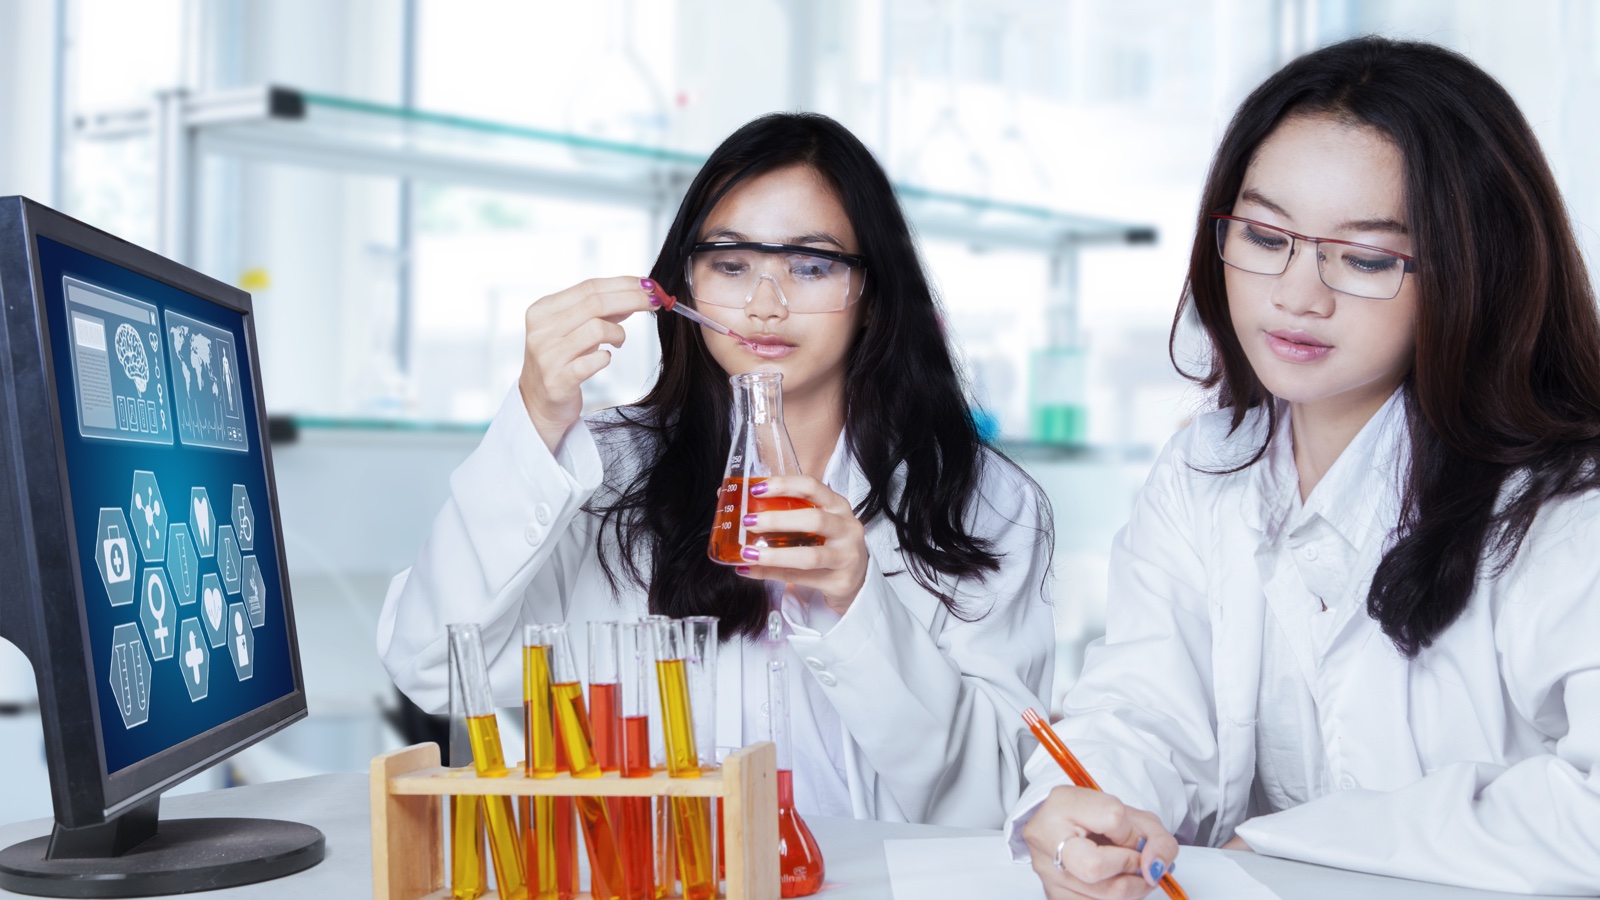 How to Write a Lab Report Introduction: 5 Pro Tips